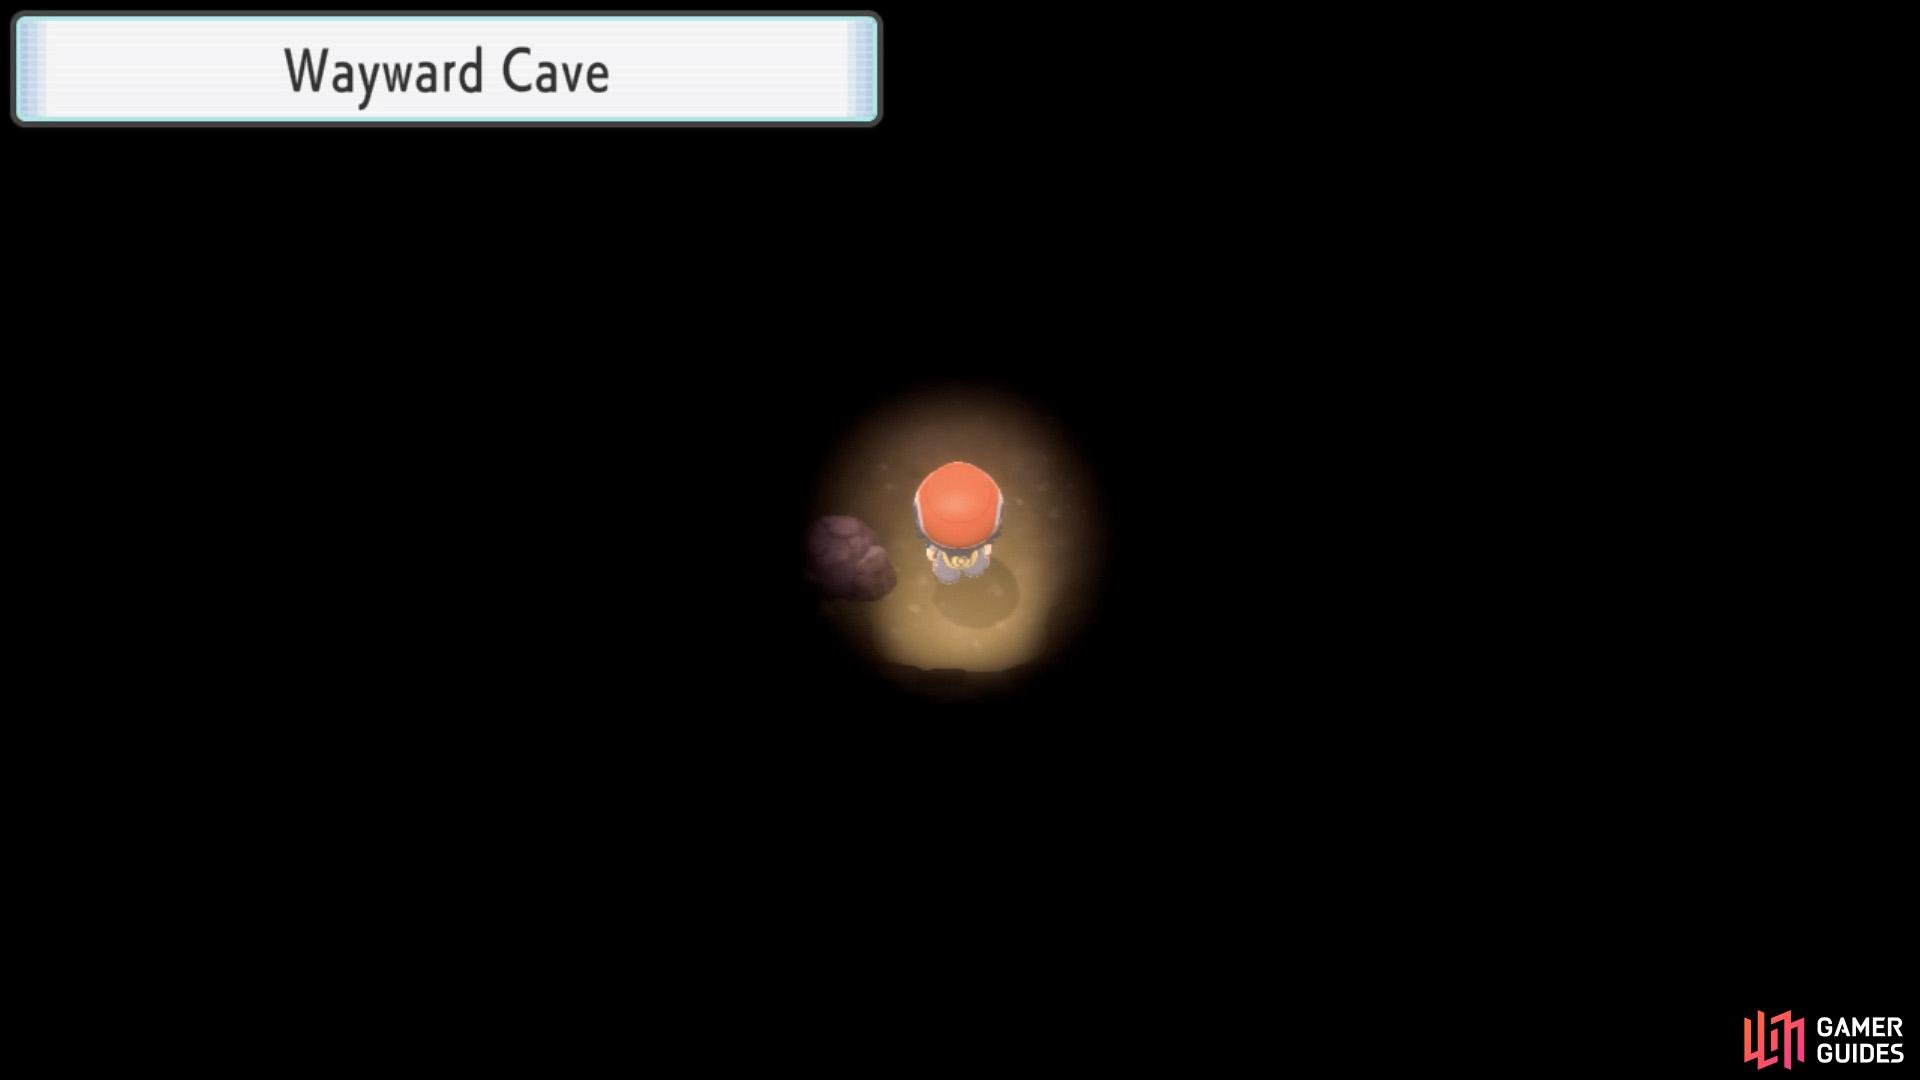 The inside of Wayward Cave is pitch-black.